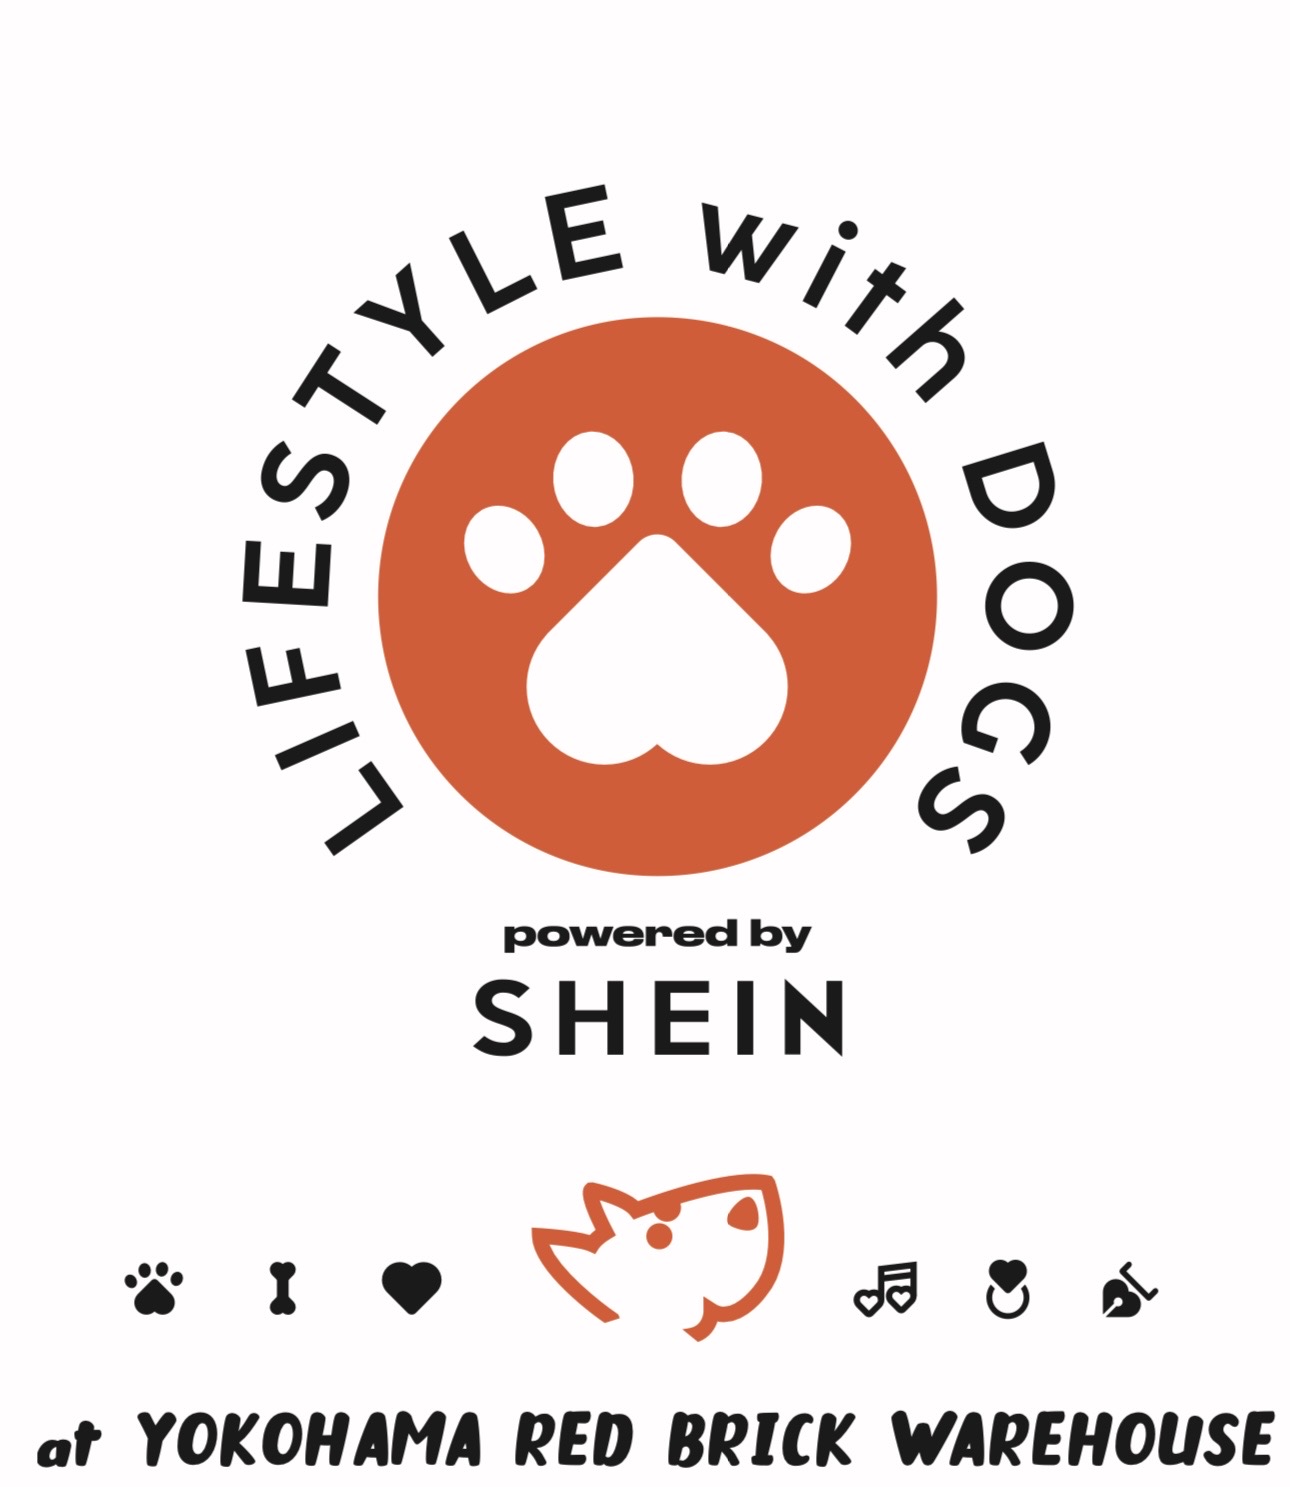 LIFE STYLE with DOGS powerd by SHEIN のロゴ